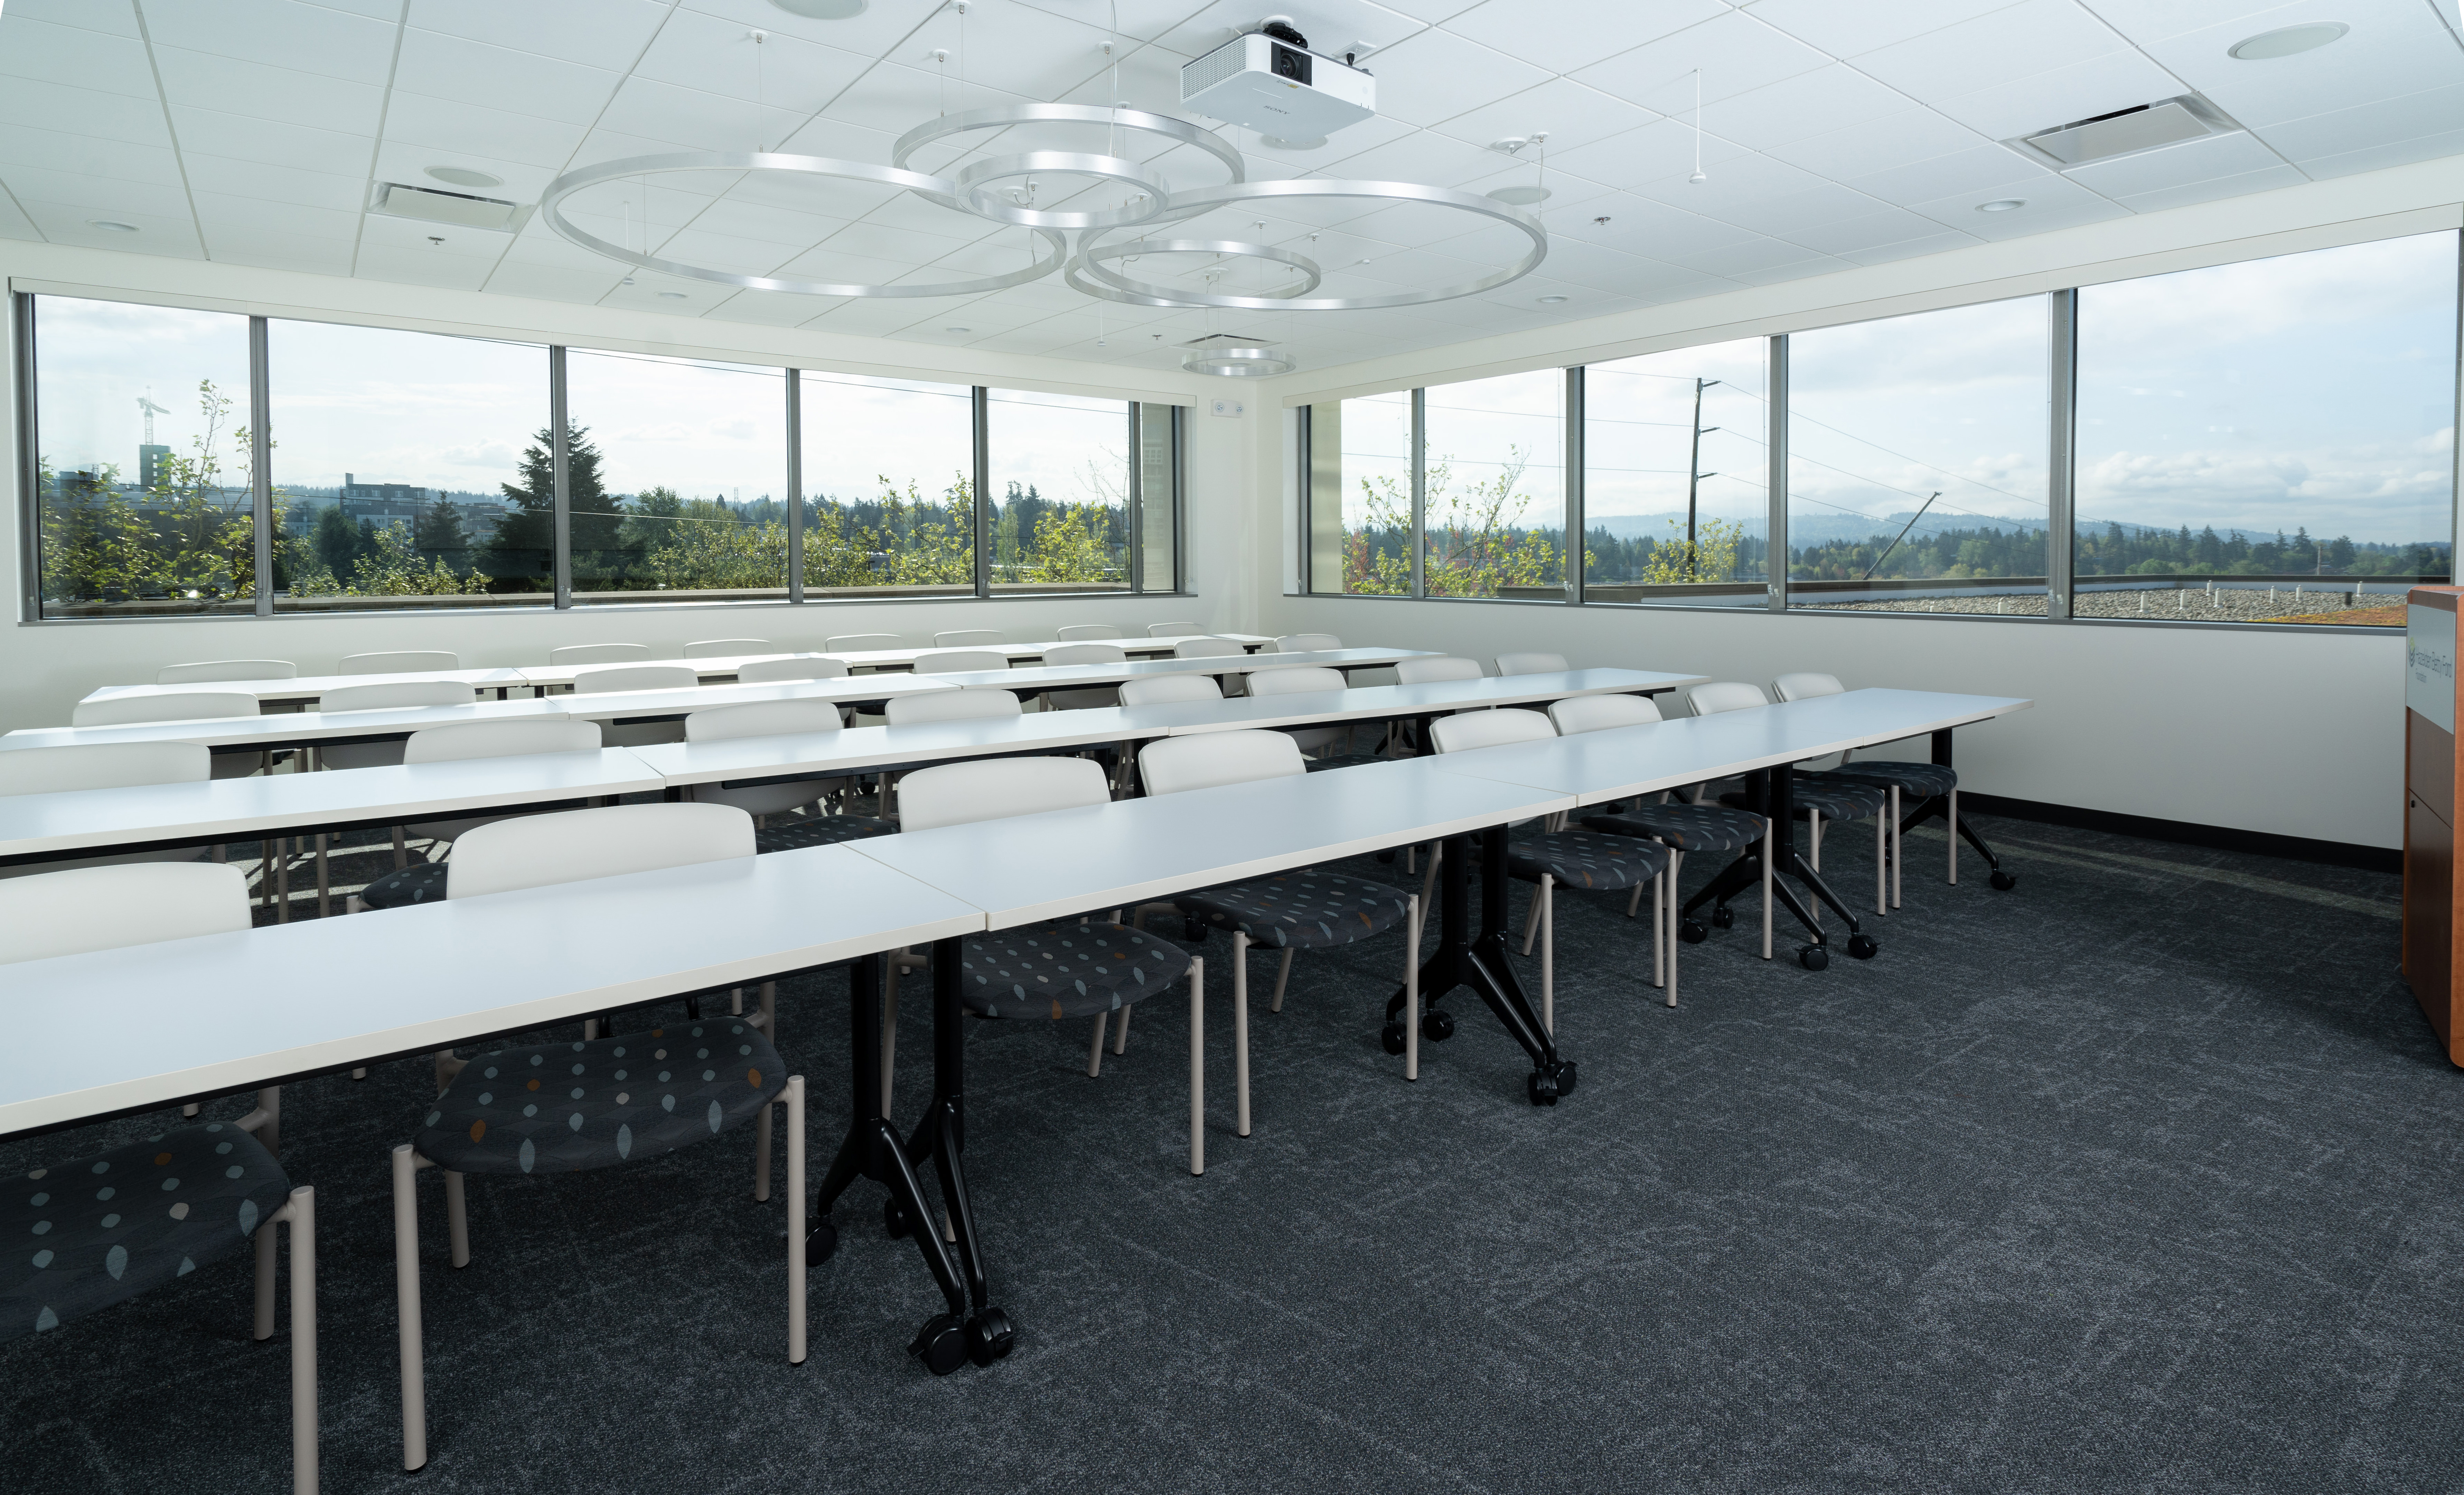 The Bellevue meeting room with bright windows, chairs and desks